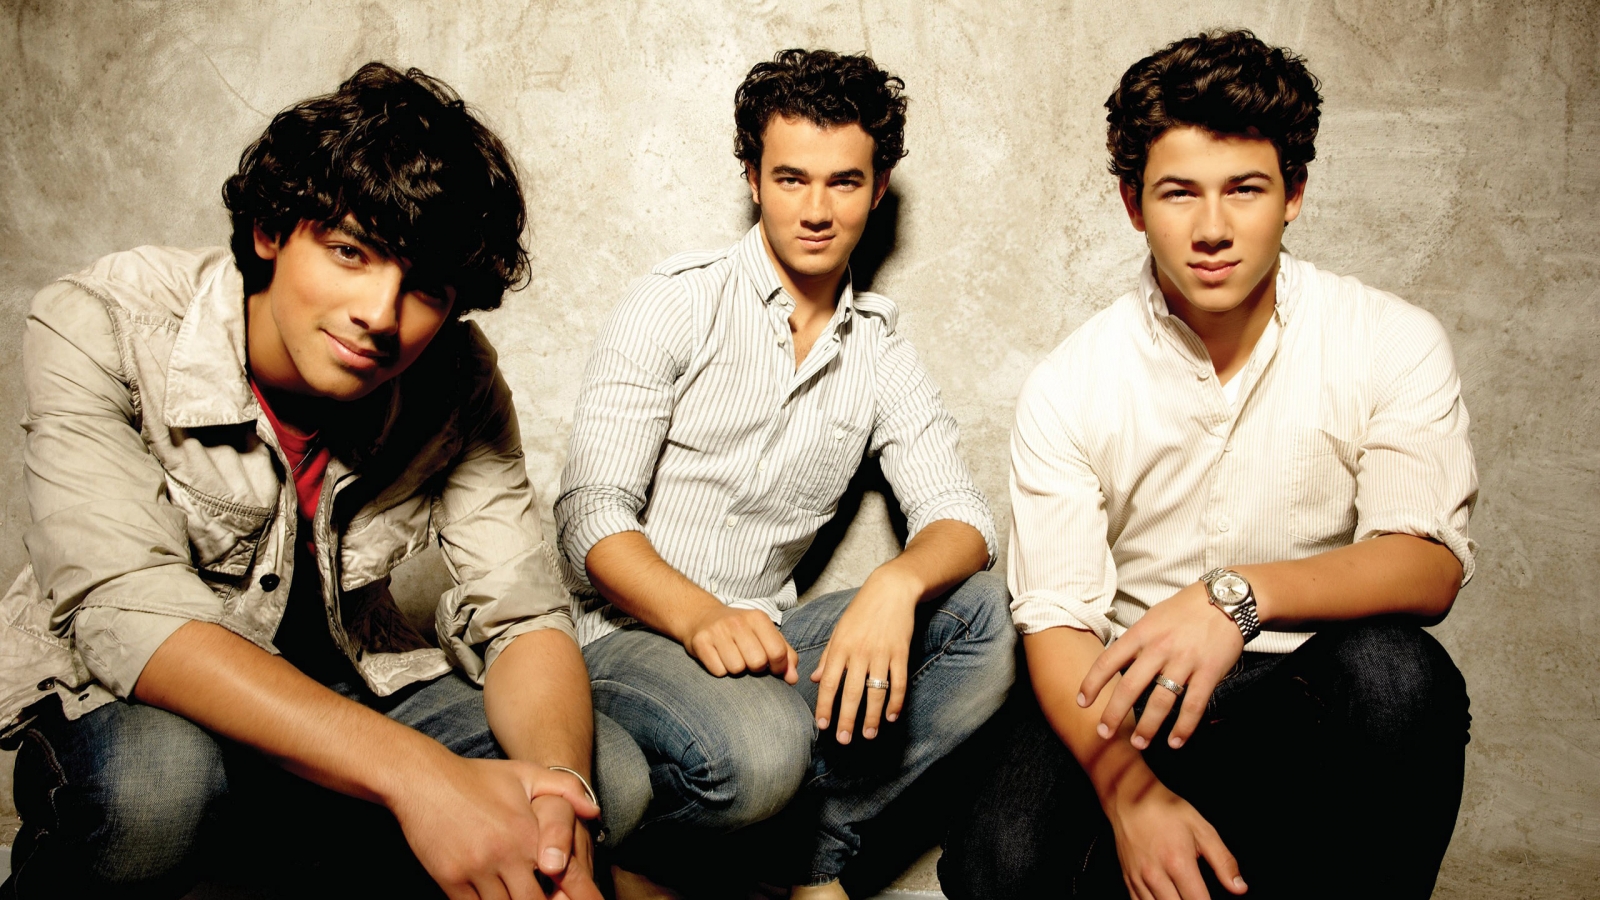 Cool Jonas Brothers for 1600 x 900 HDTV resolution